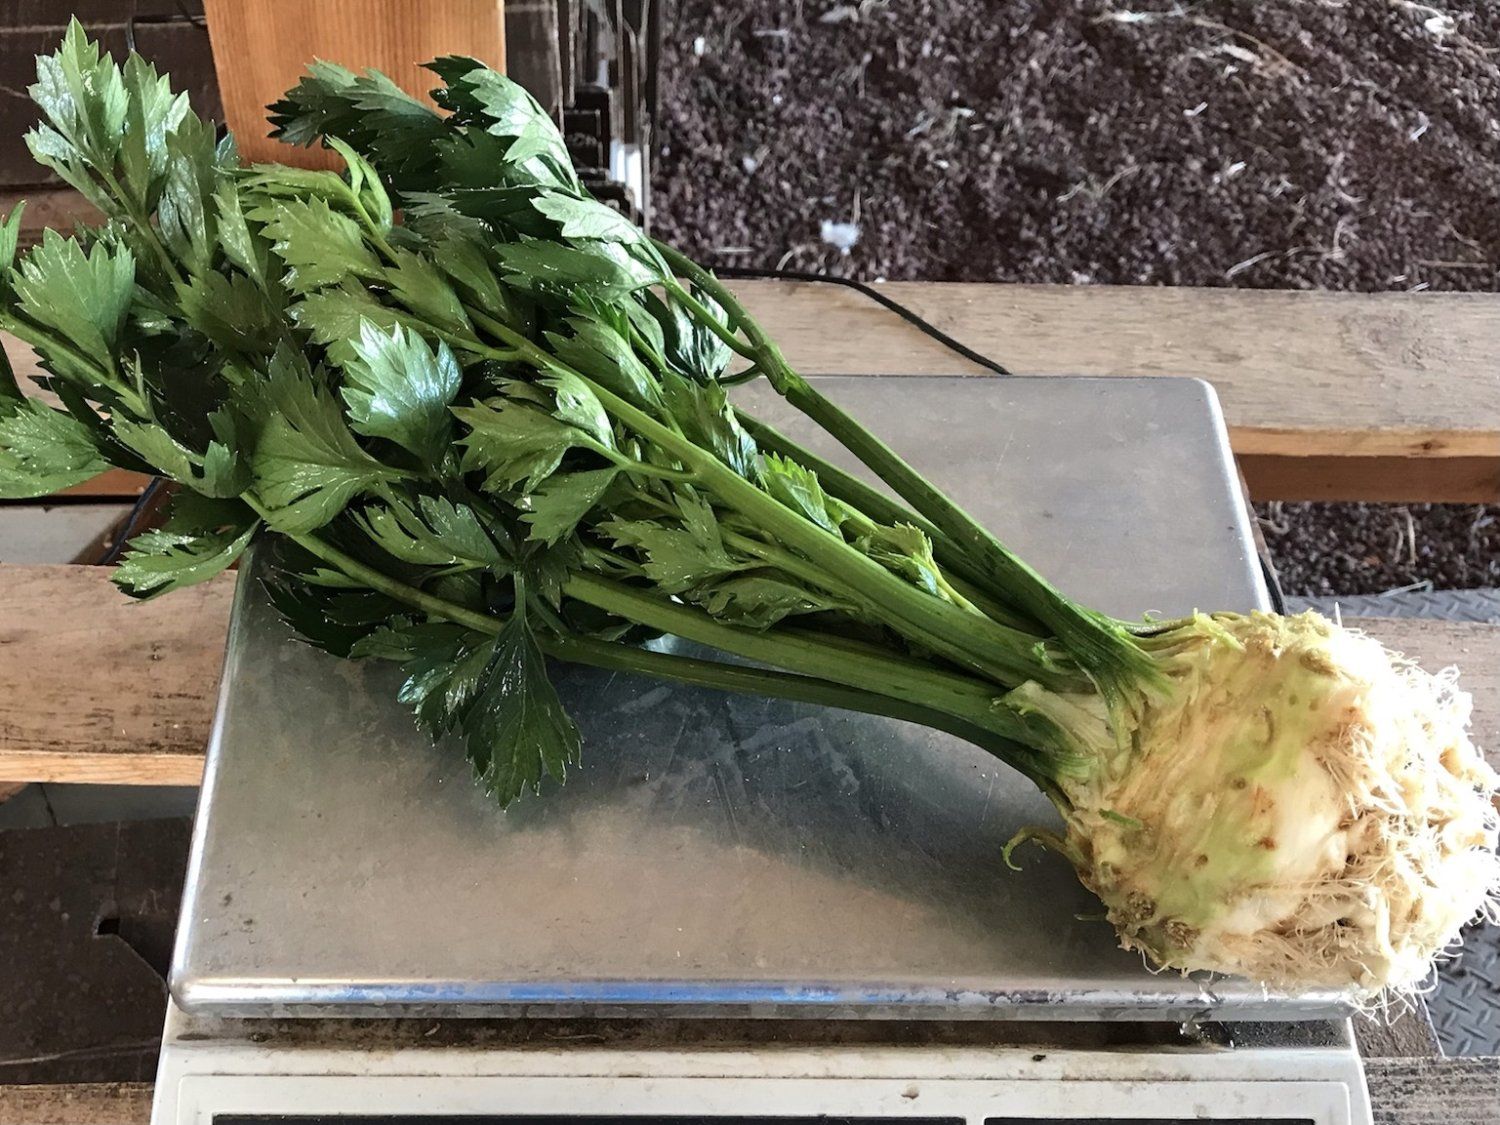 Previous Happening: Celeriac, Rosemary, and Baby Bok Choy this Week